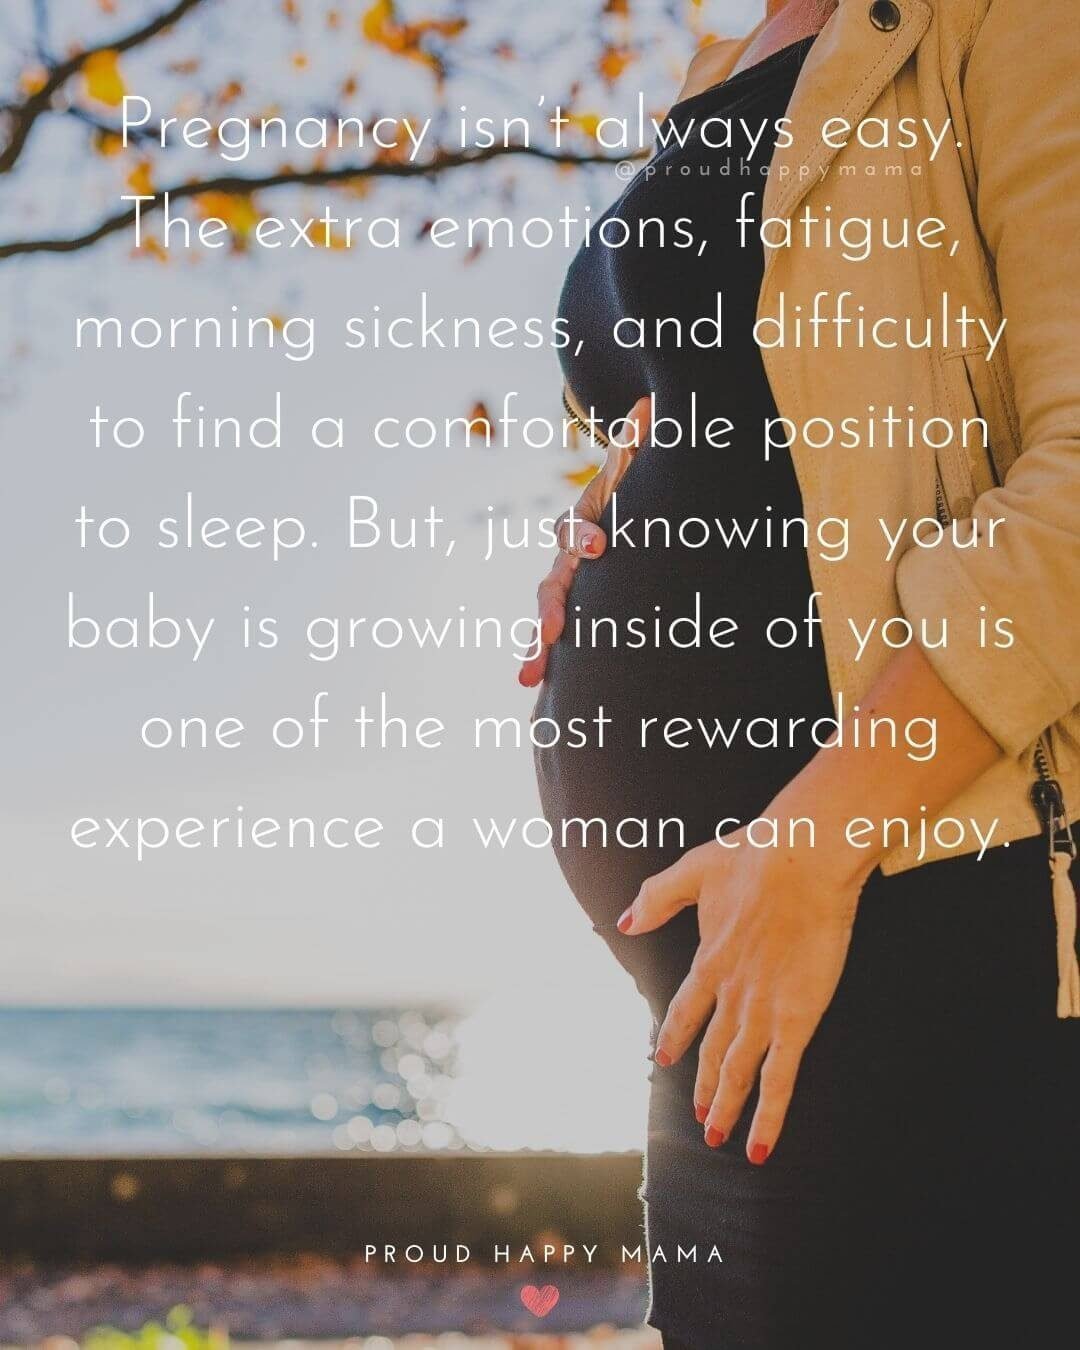 70 Inspirational Pregnancy Quotes For Expecting Mothers